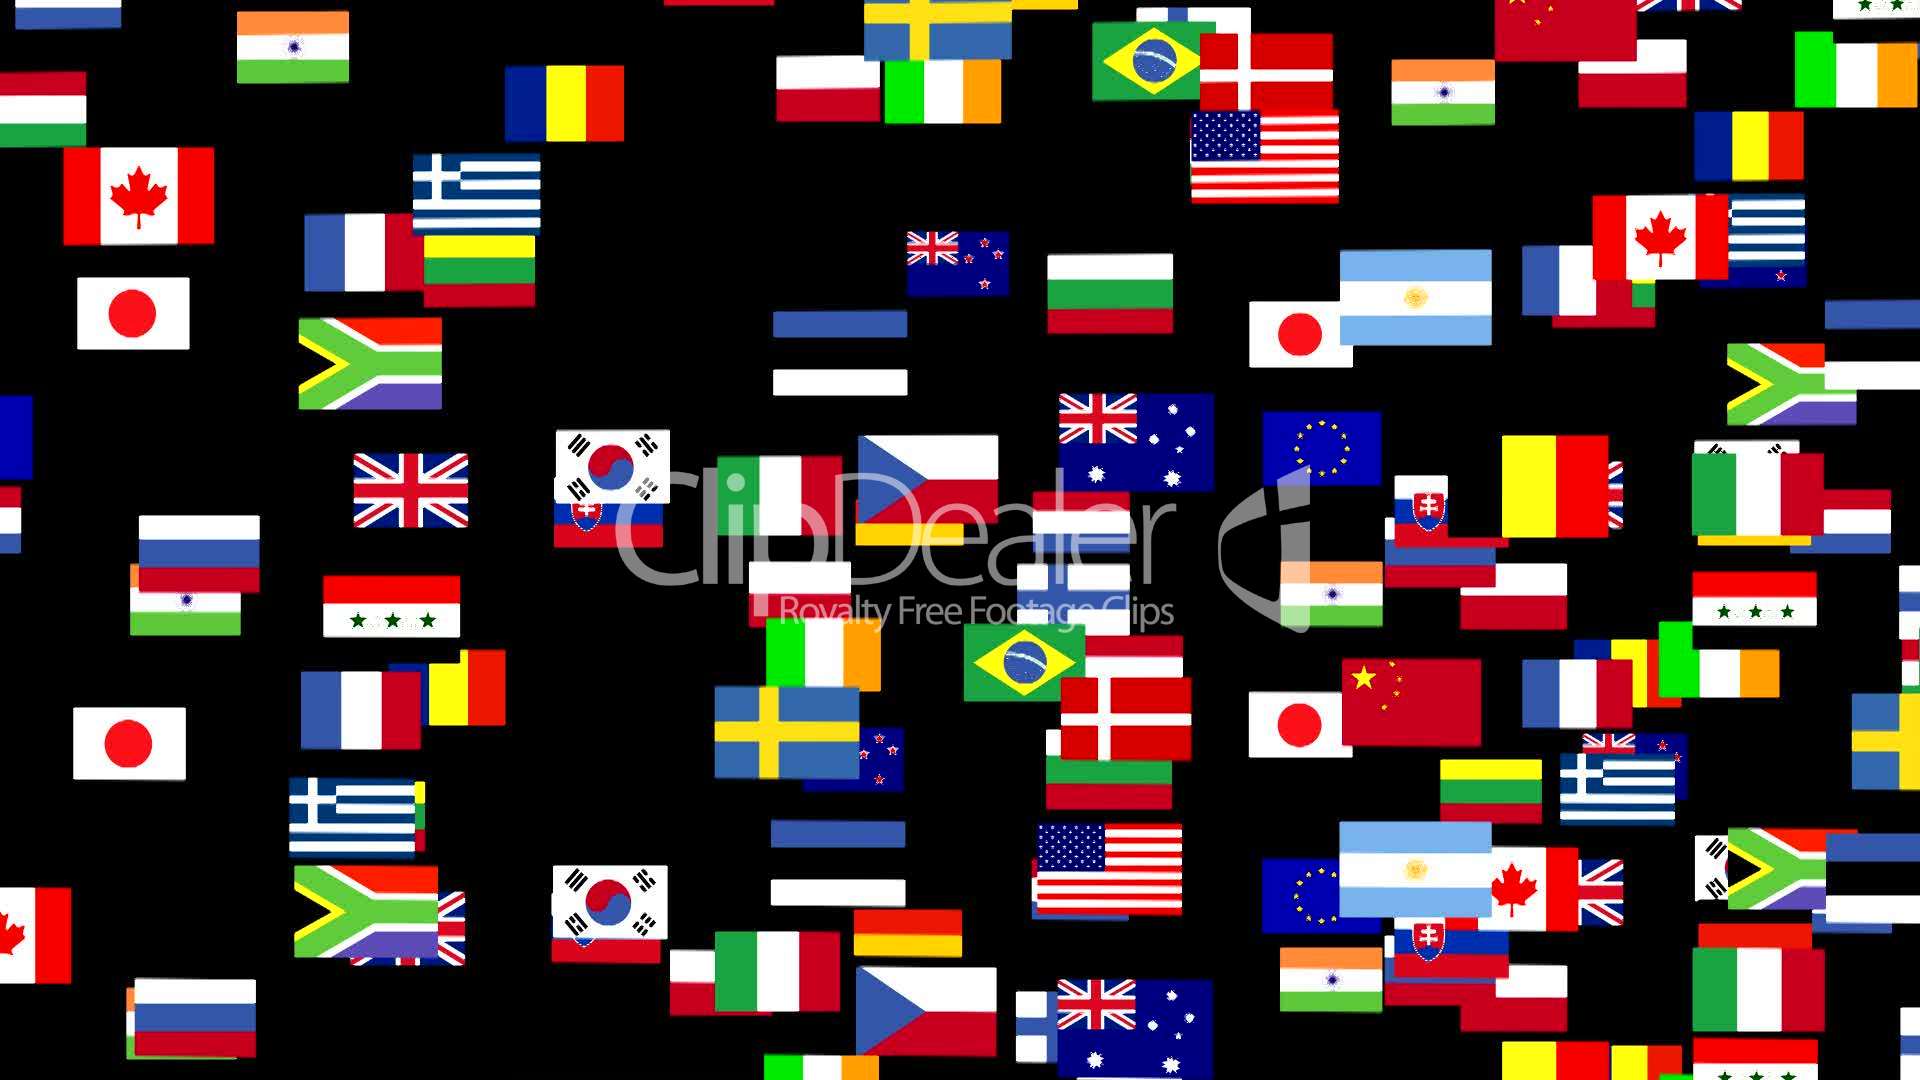 Flags of the world animated 4: Royalty-free video and stock footage